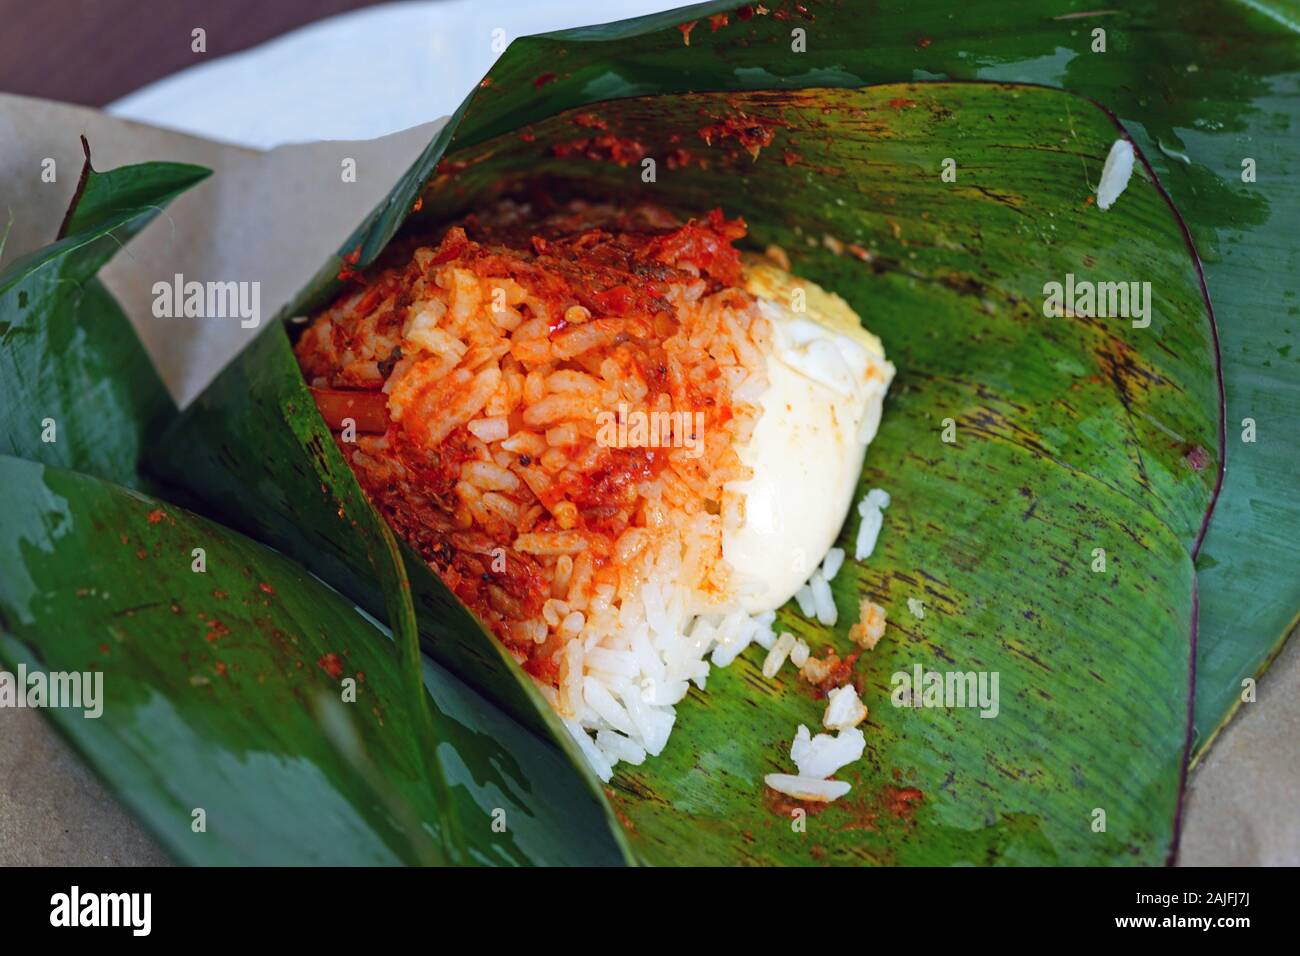 Pyramid Of Malaysian Nasi Lemak Fragrant Rice Wrapped In Pandan Leaf And Paper Stock Photo Alamy